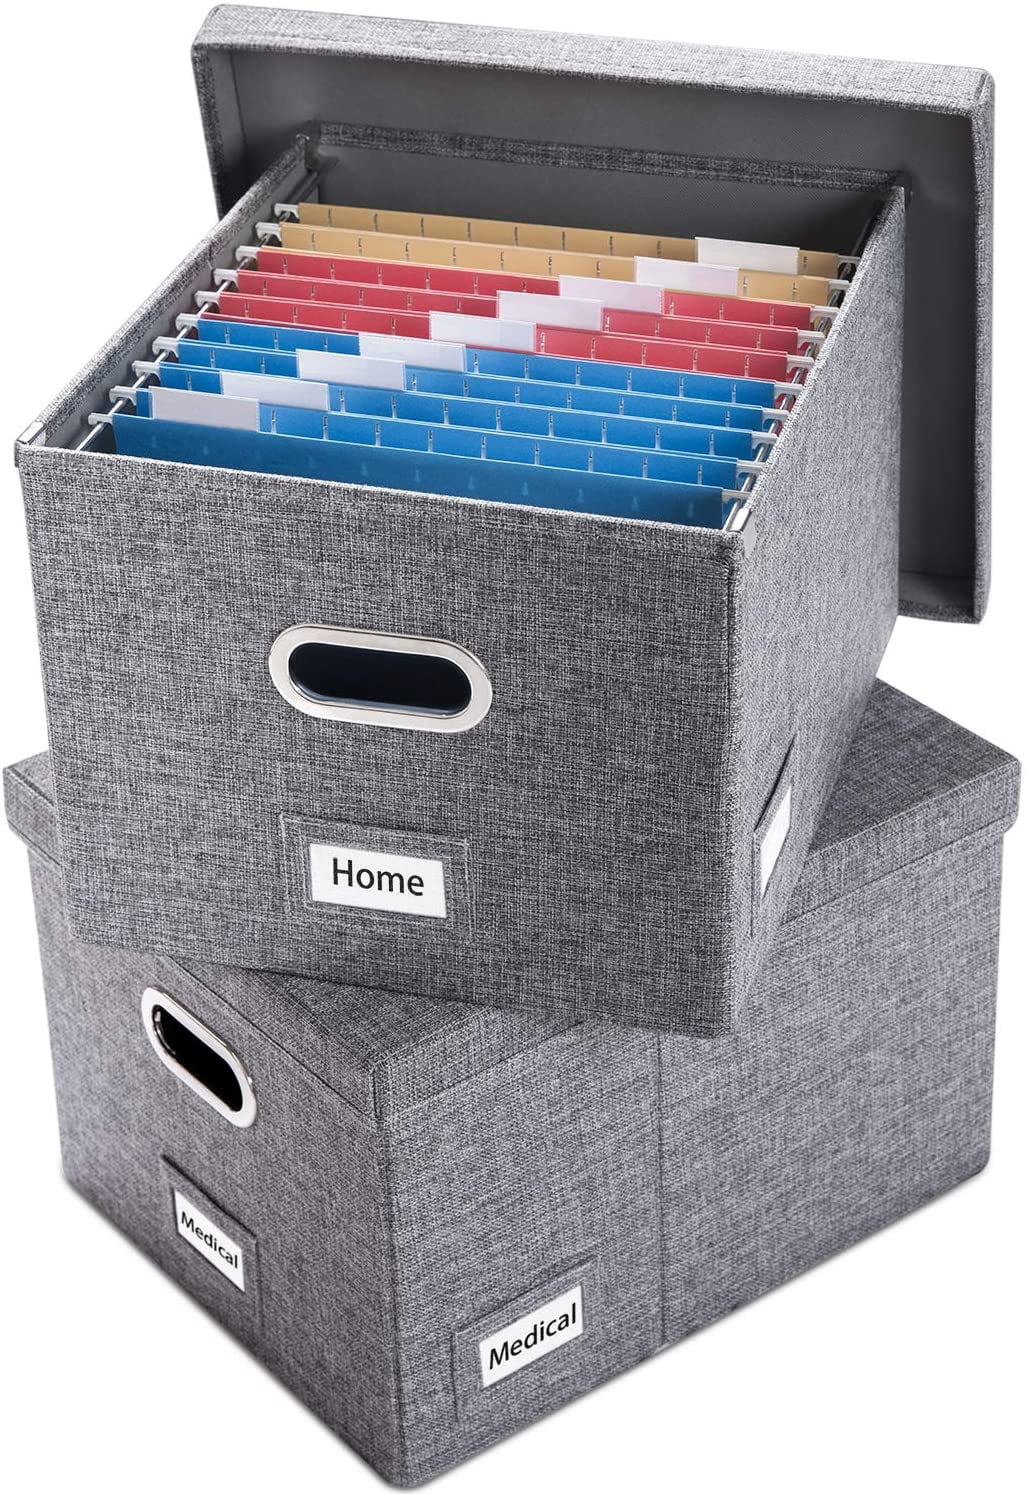 PRANDOM File Organizer Box 15x12.2x10.75 inch Set of 1 Collapsible Decorative Linen Filing Storage Hanging File Folders with Lids Office Cabinet Letter Size Black 